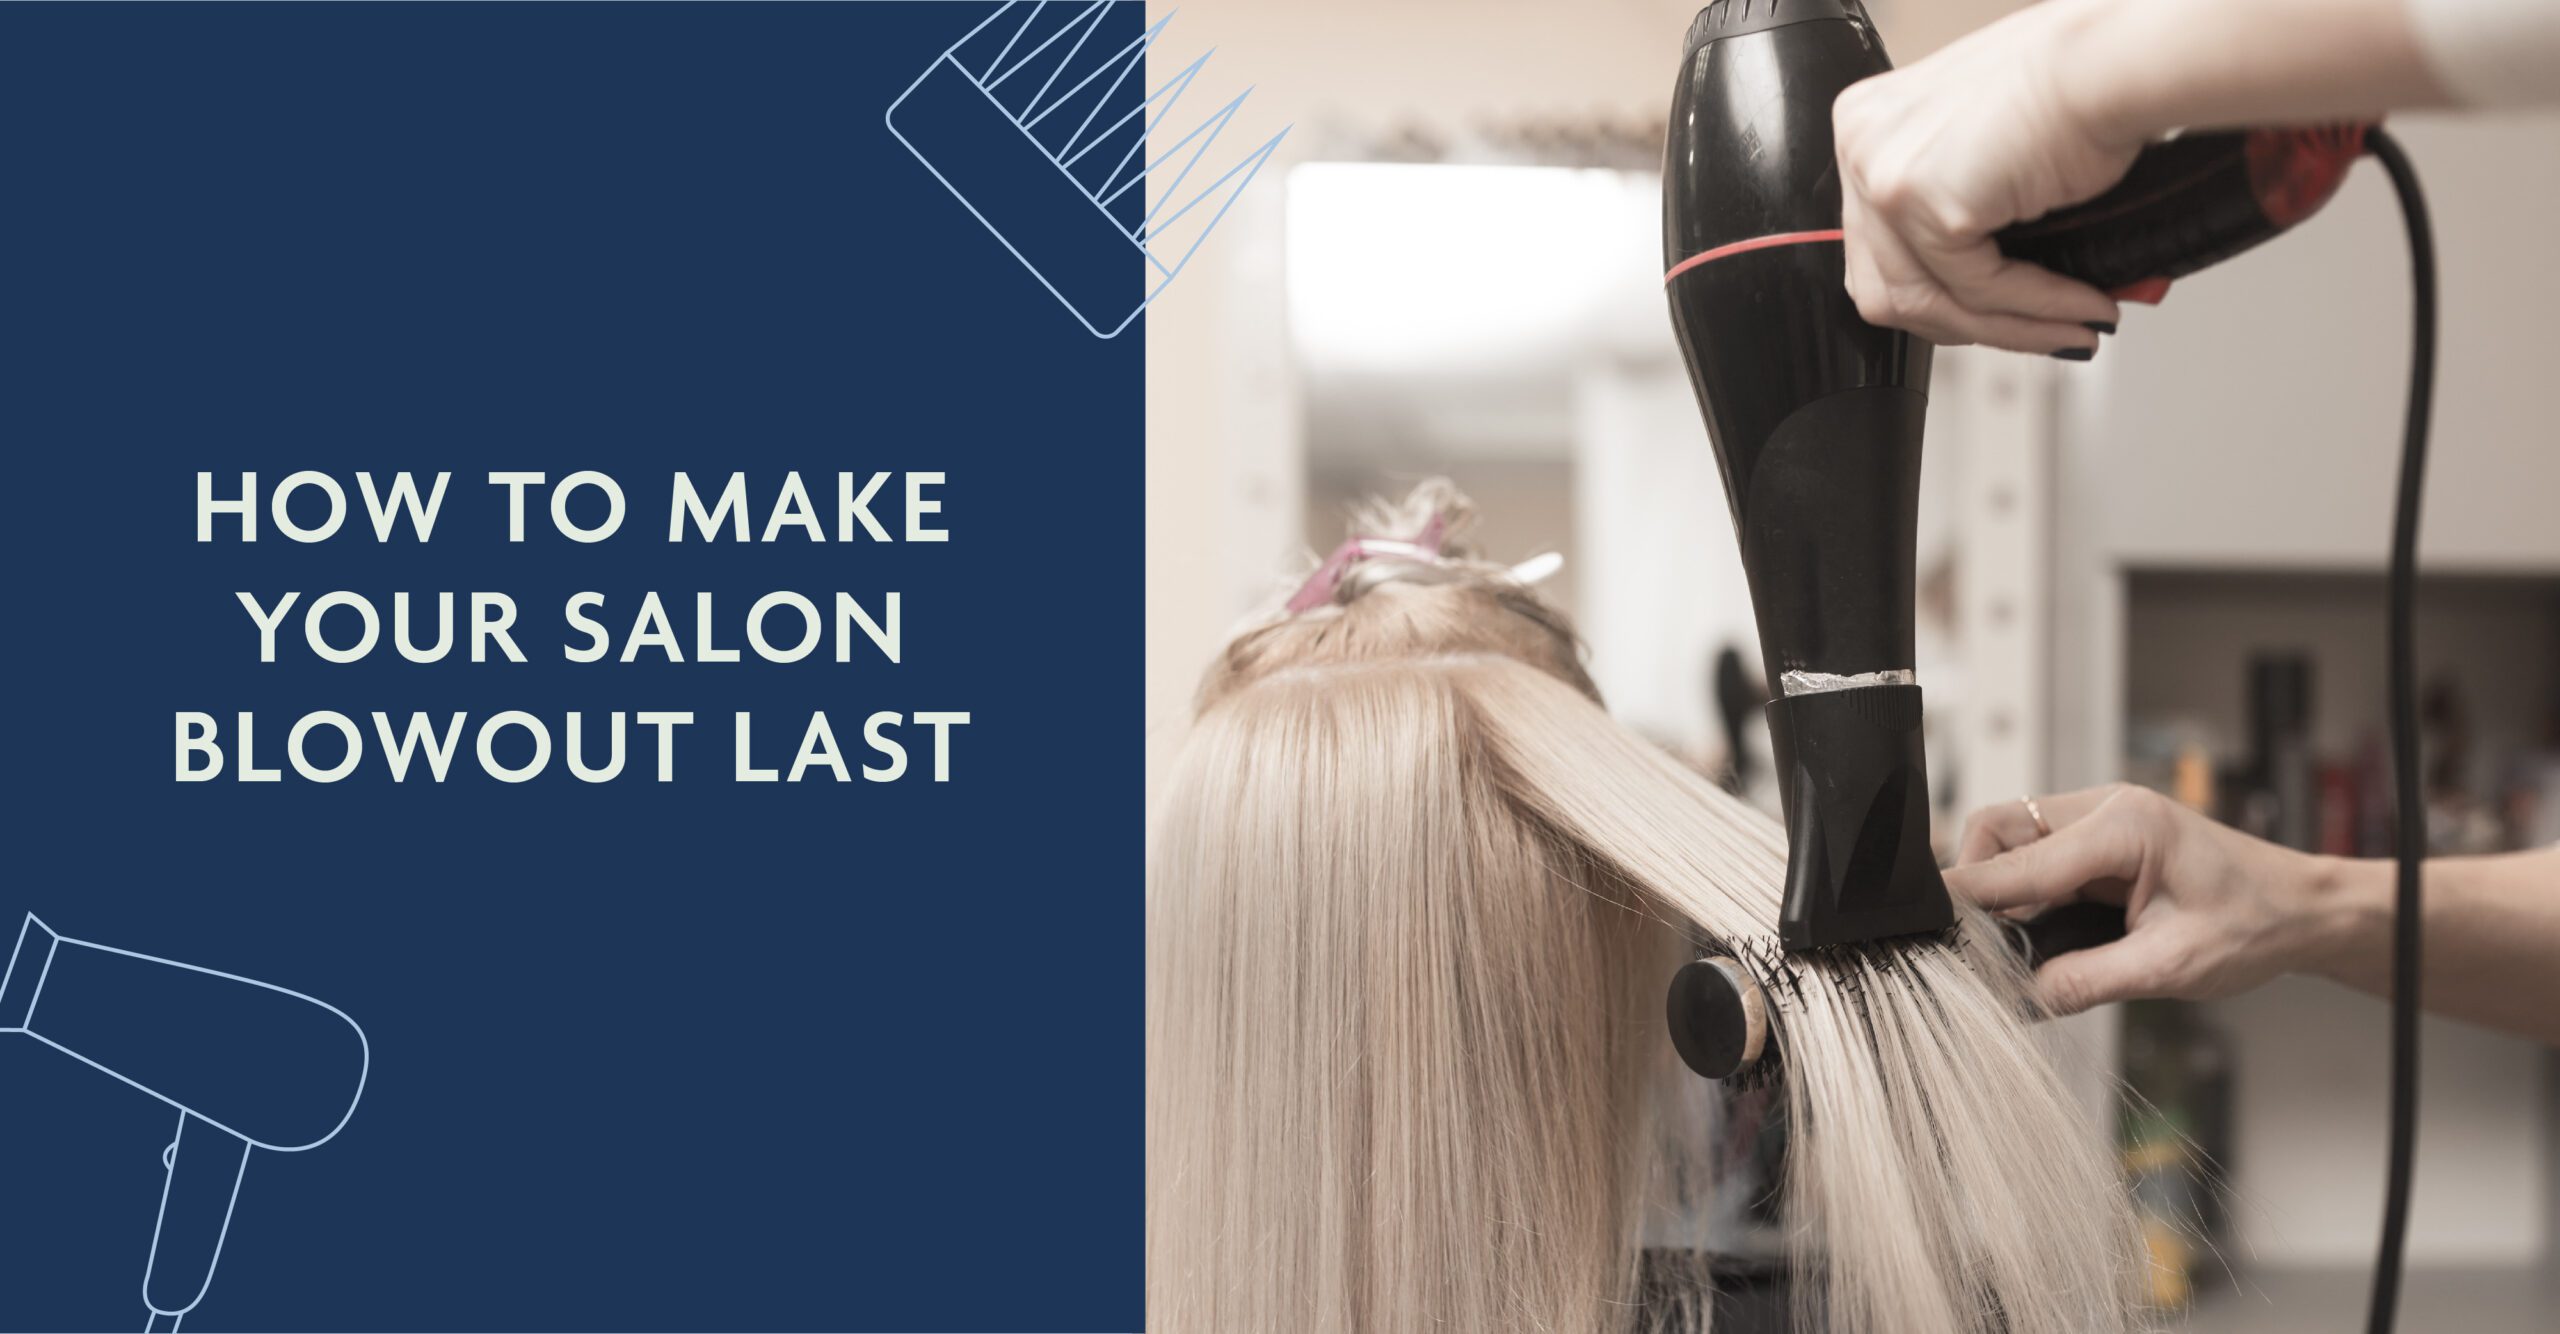 How to Make Your Salon Blowout Last